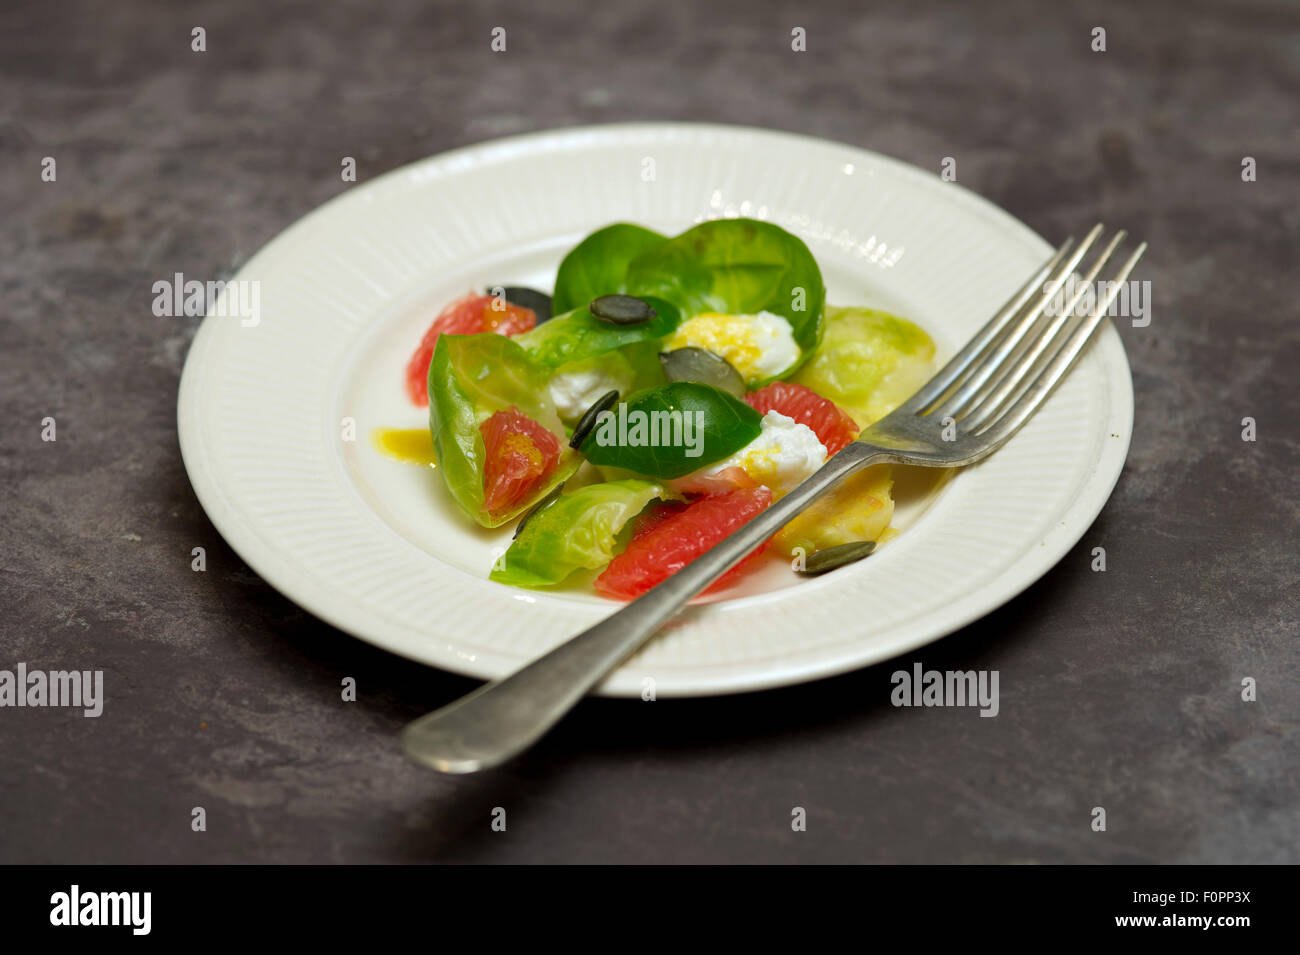 Brussels sprout salad with grapefruit and ricotta. Stock Photo